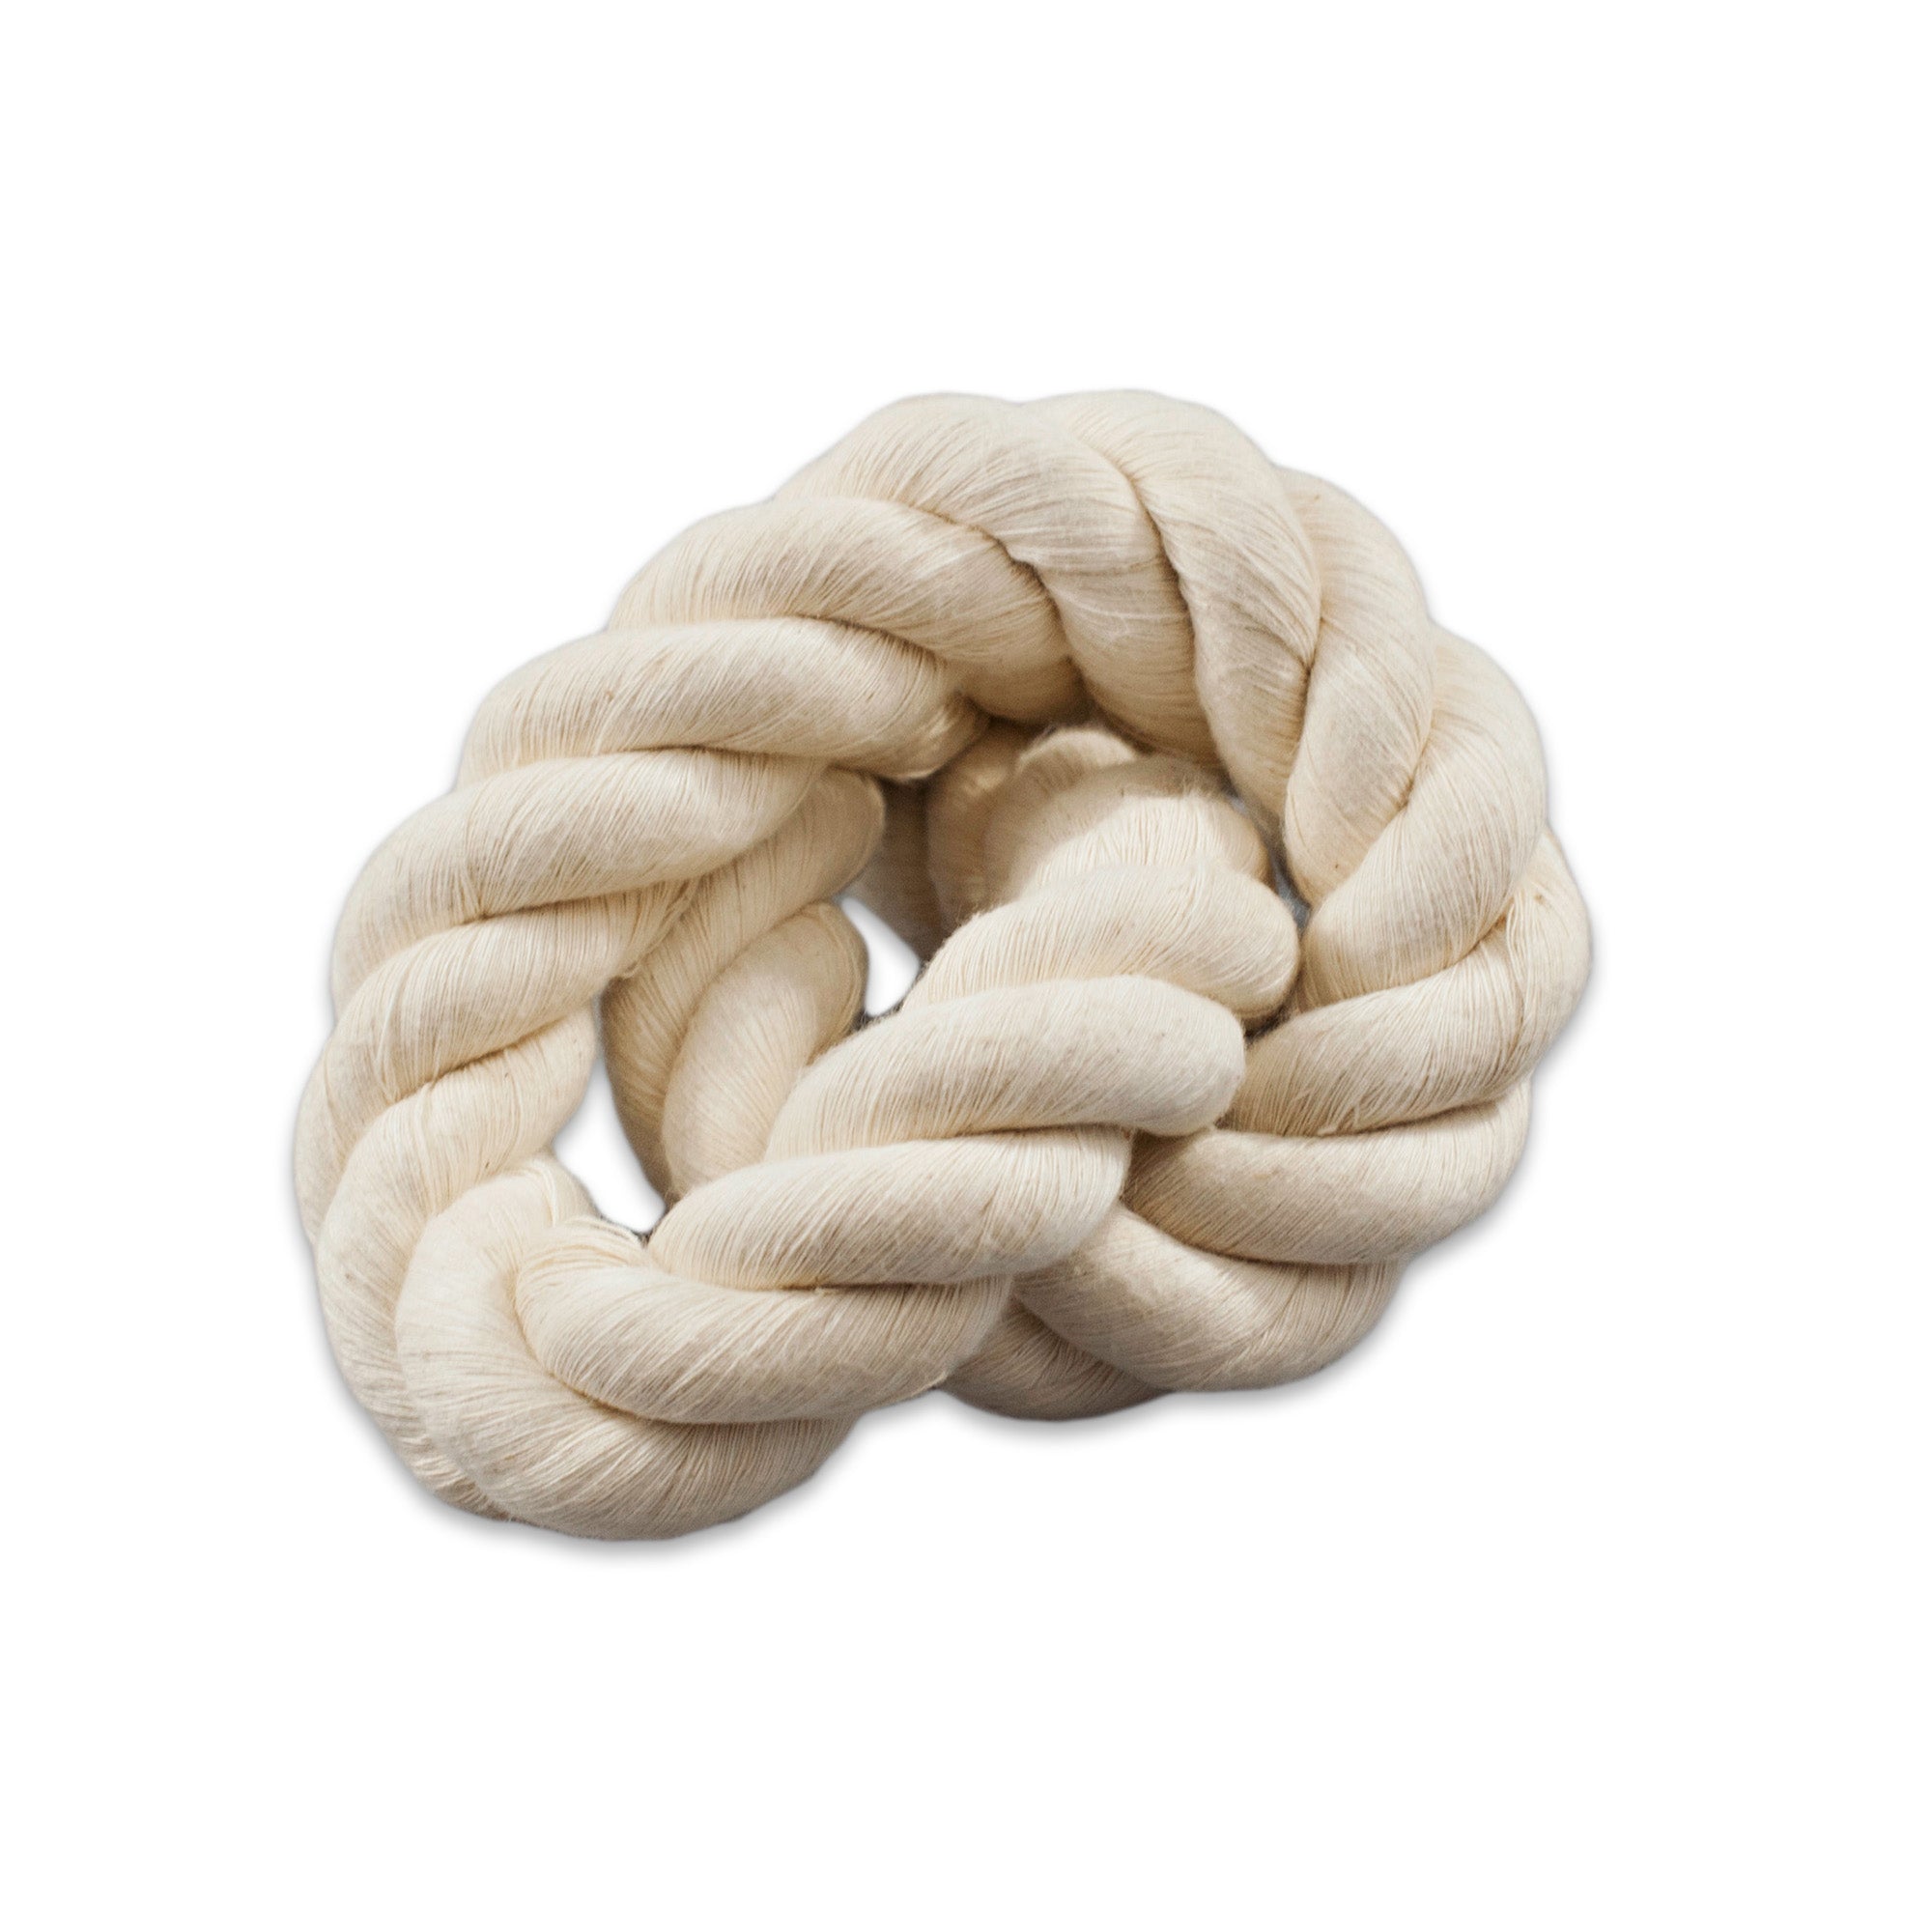 Twisted Cotton Rope, 1-1/4 inch, 3 Strand, Natural – Casket